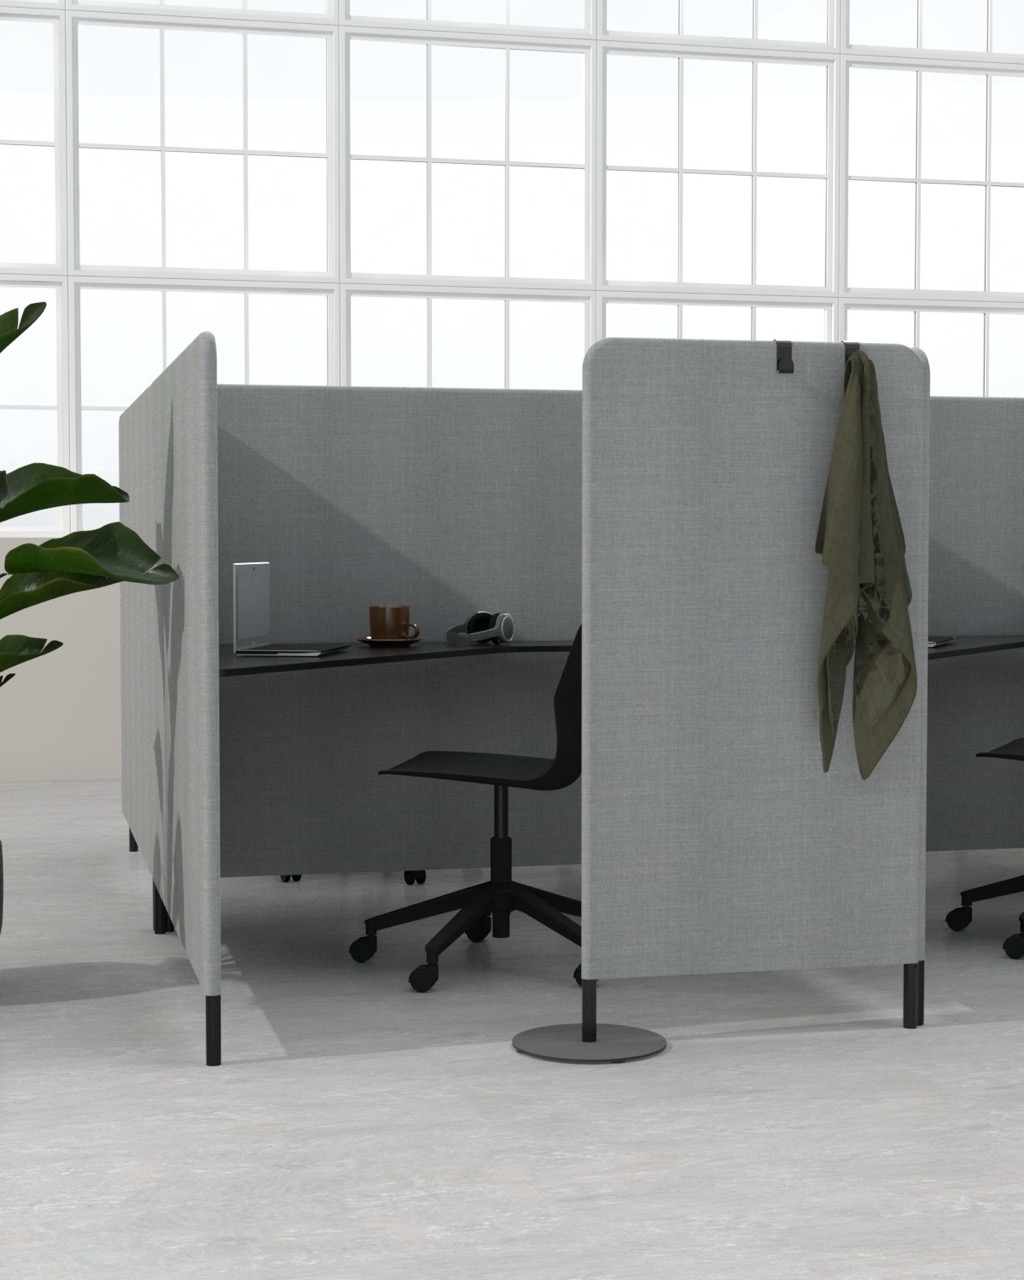 OCEE&FOUR – Work & Study Booths – FourPeople Work Booth – Lifestyle Image 1 Large